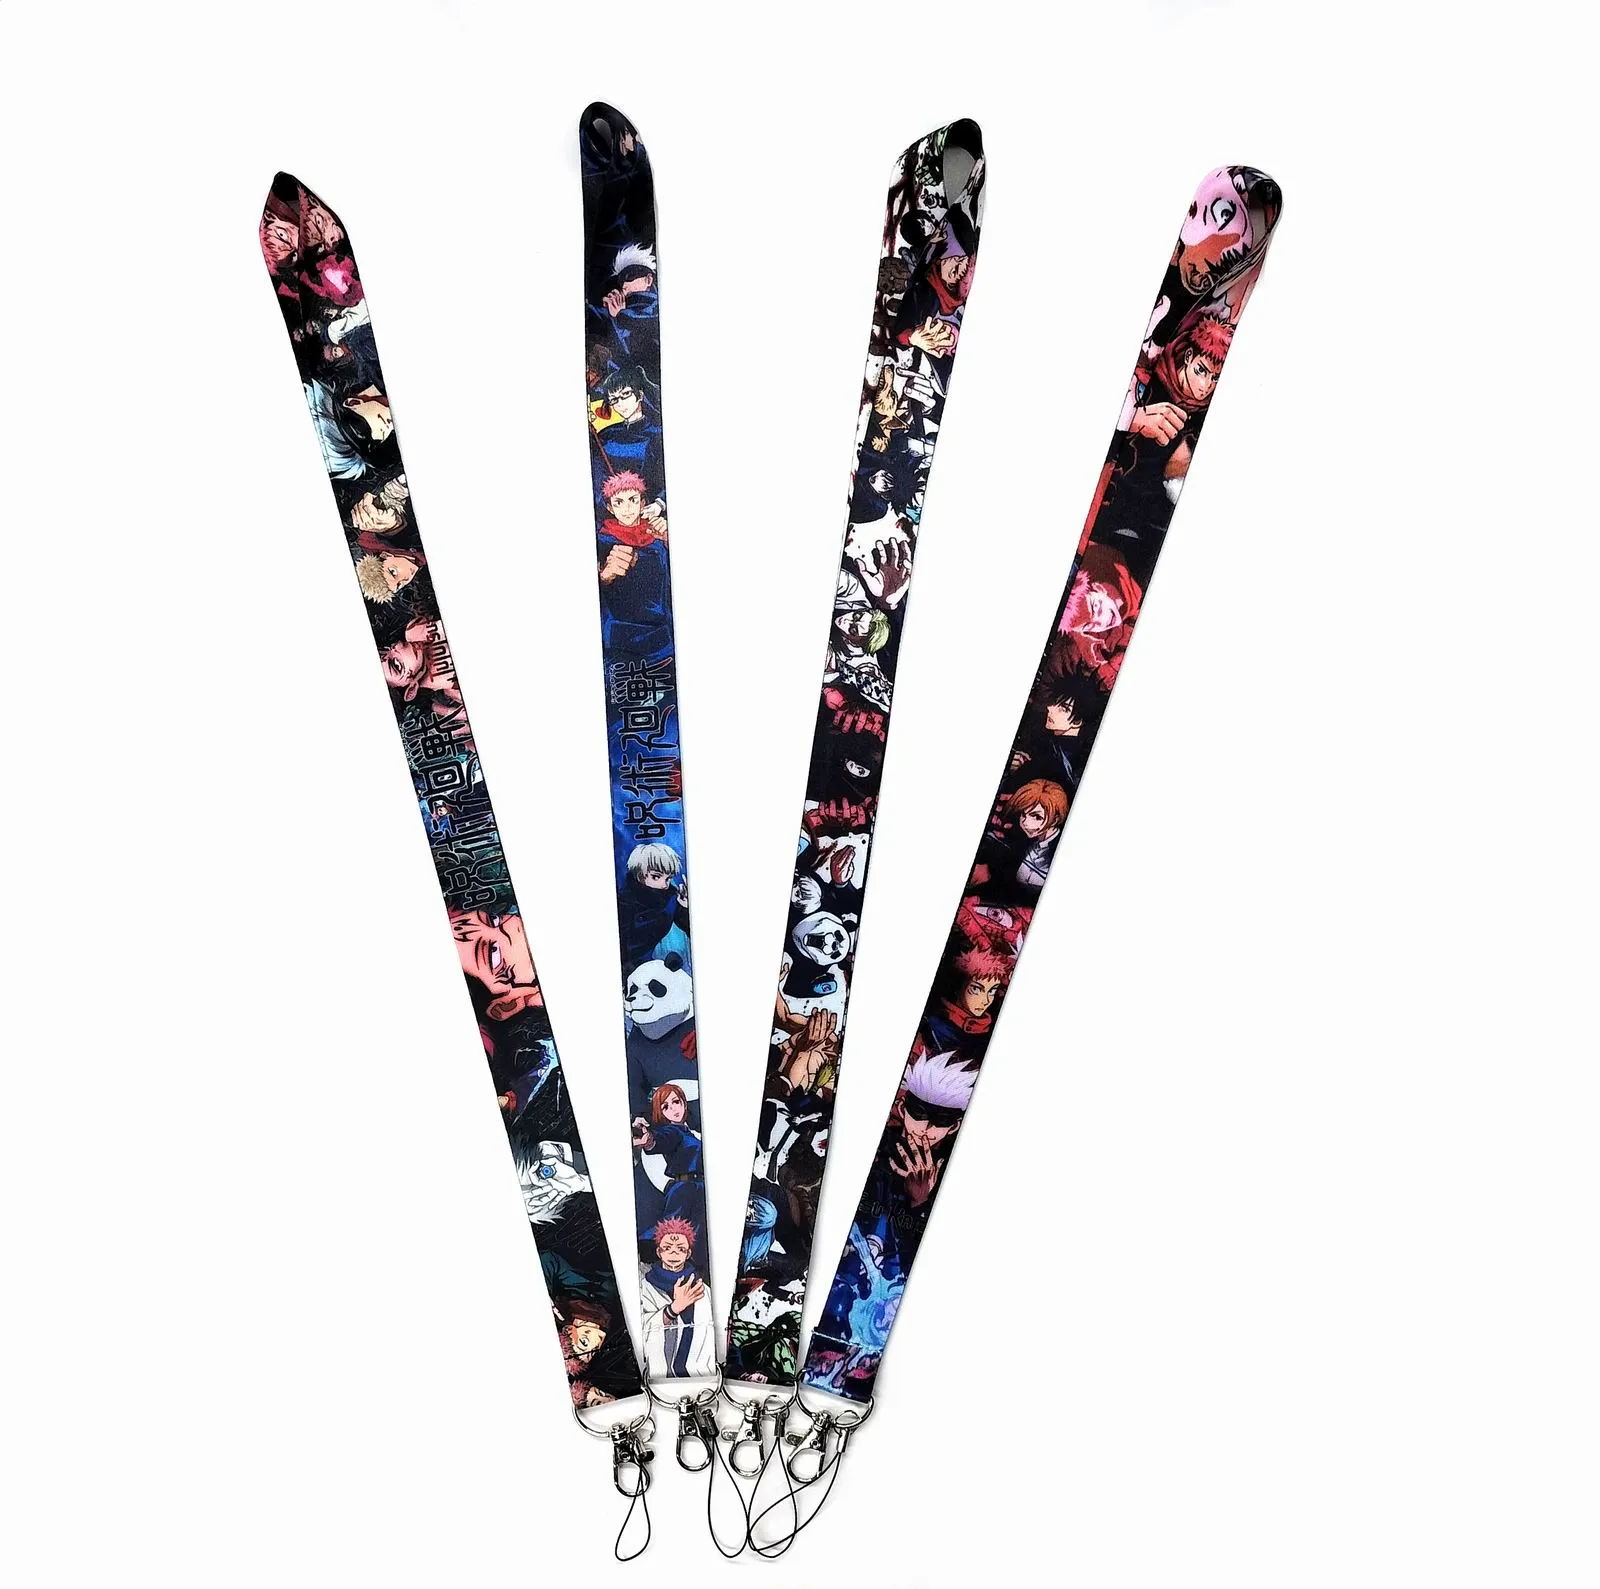 Jujutsu Kaisen Neck Strap Ghostface Lanyard Cartoon Japan Anime Design For  Boys And Girls Key Chain Accessory And Badge Holder Wholesale Gifts From  Ai_158, $0.47